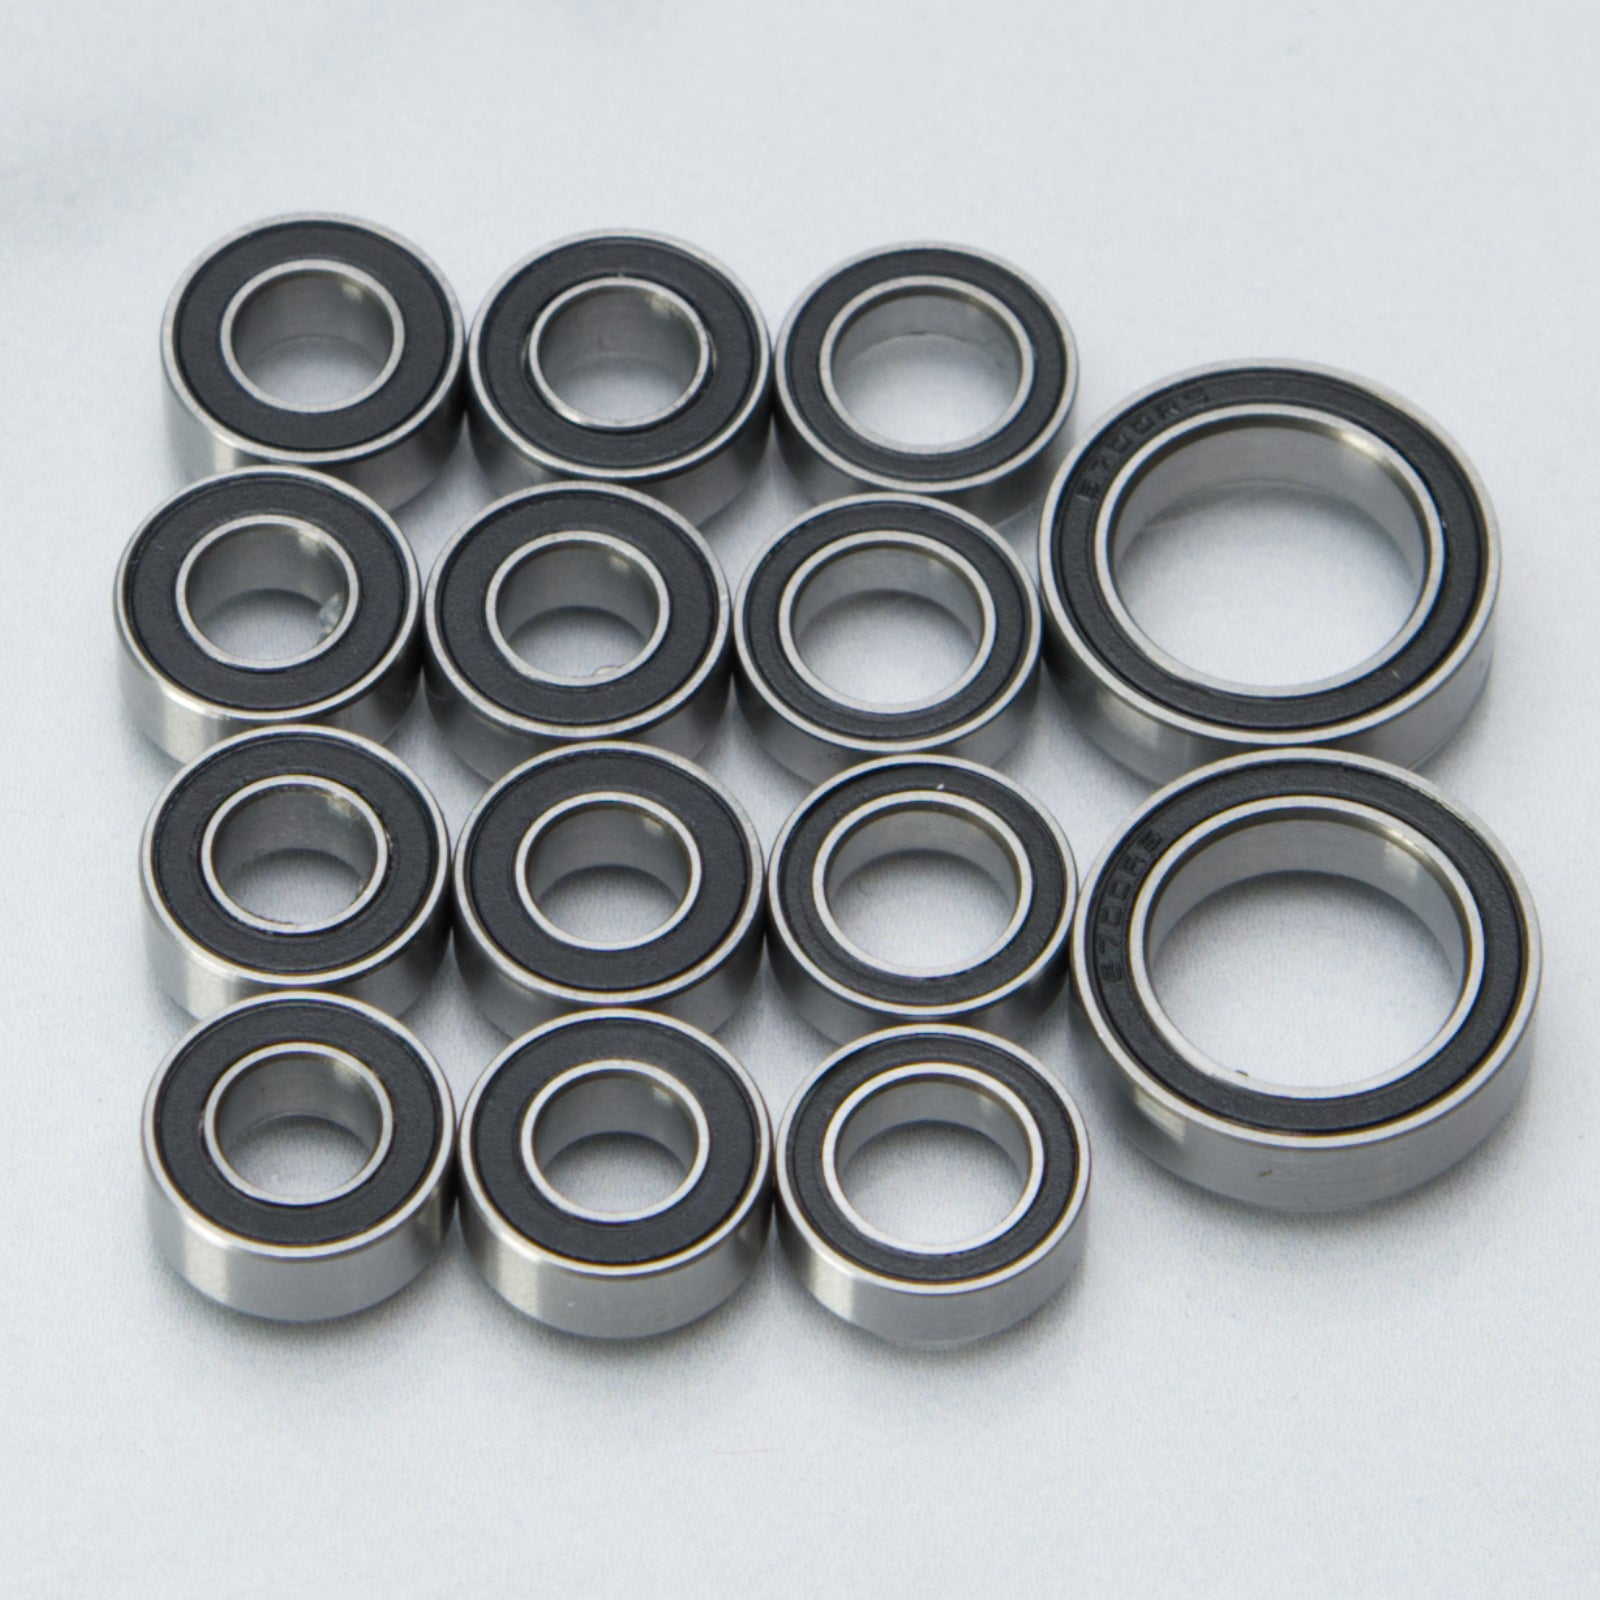 Usukani D3T Drift Tricycle BAJCICA, D3T Drift Tricycle TUKCICA - Sealed Bearing Kit